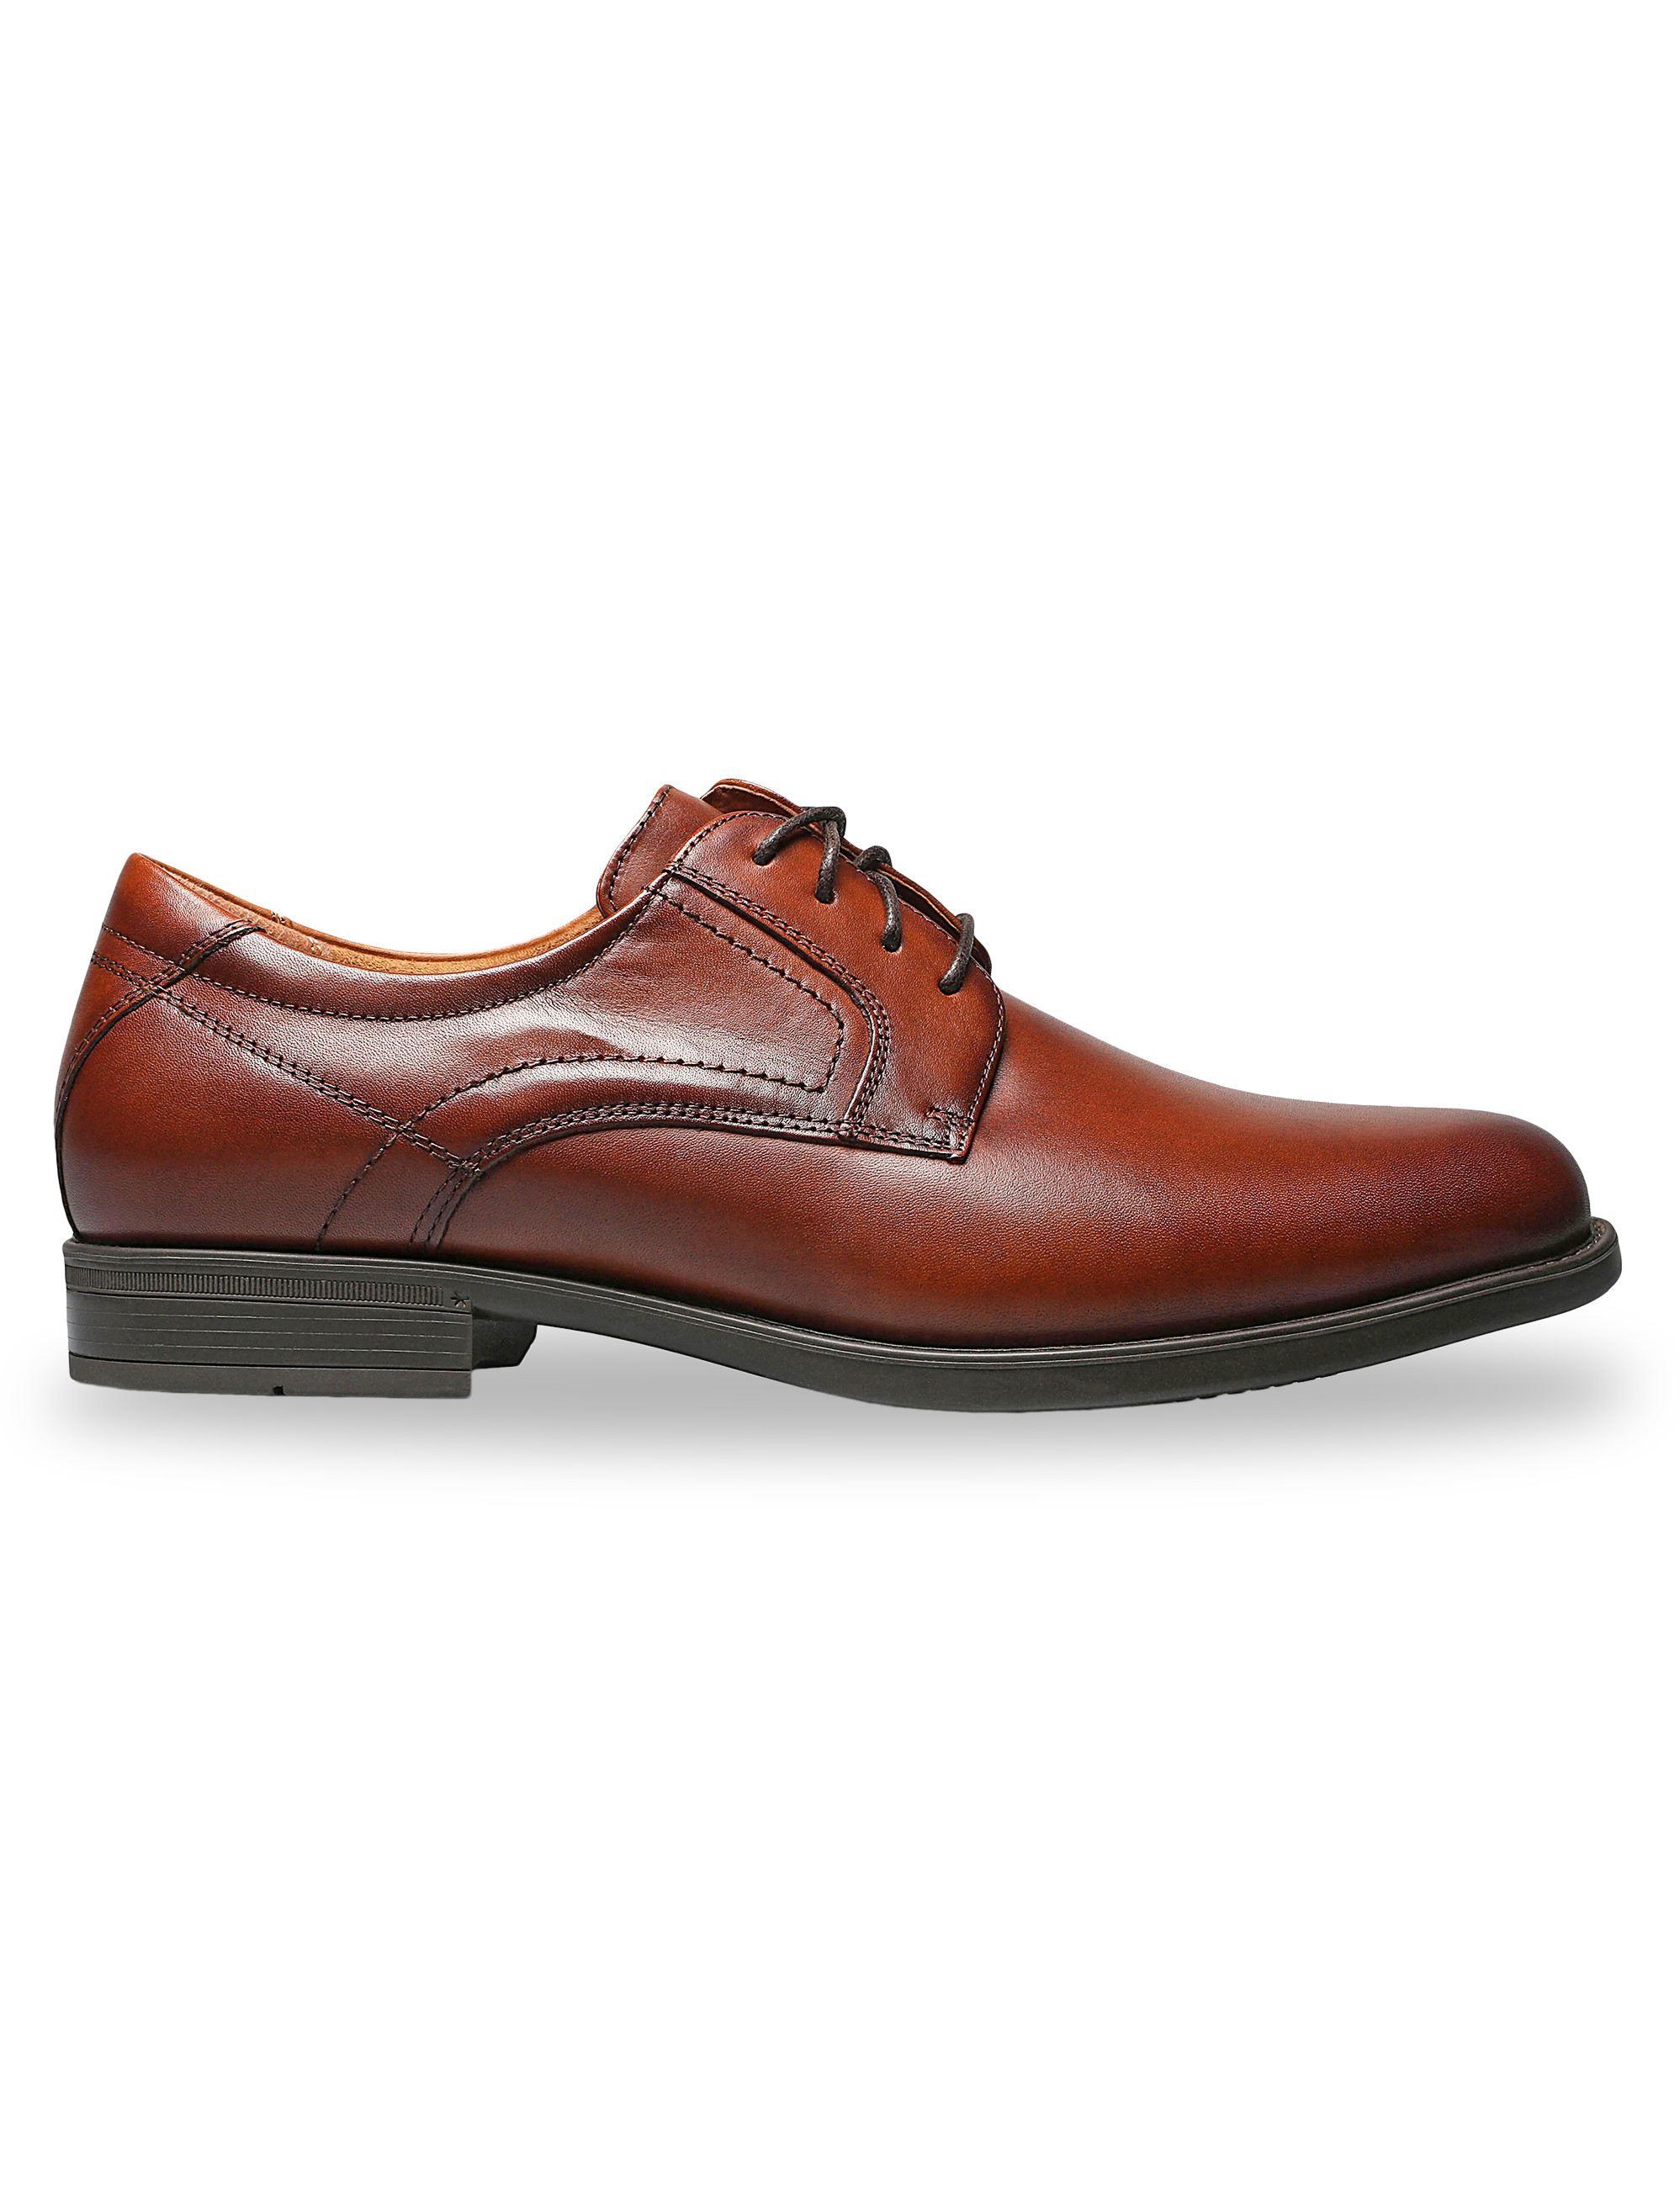 Extra Wide Dress Shoes in Big Sizes | DXL